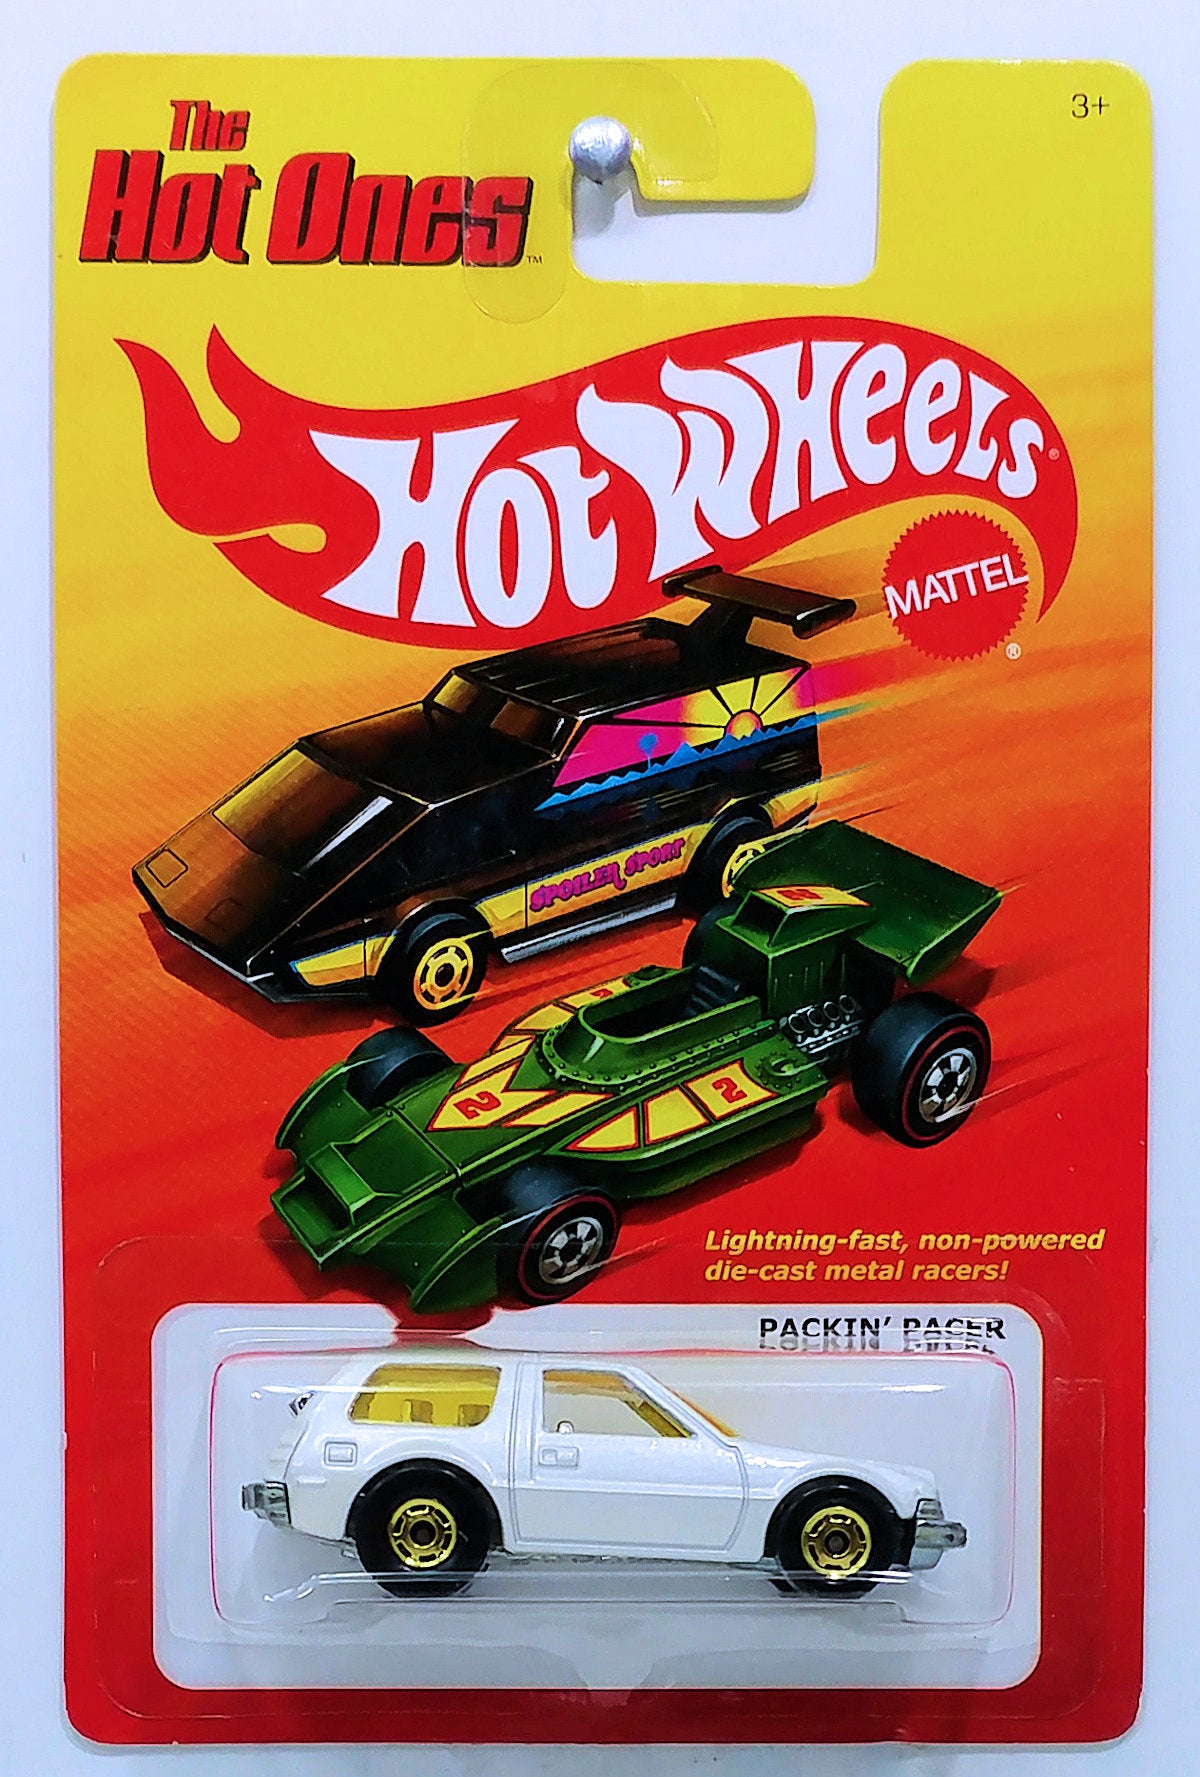 Hot Wheels 2011 - The Hot Ones - Packin' Pacer (AMC) - White - Lightning Fast Metal Racers